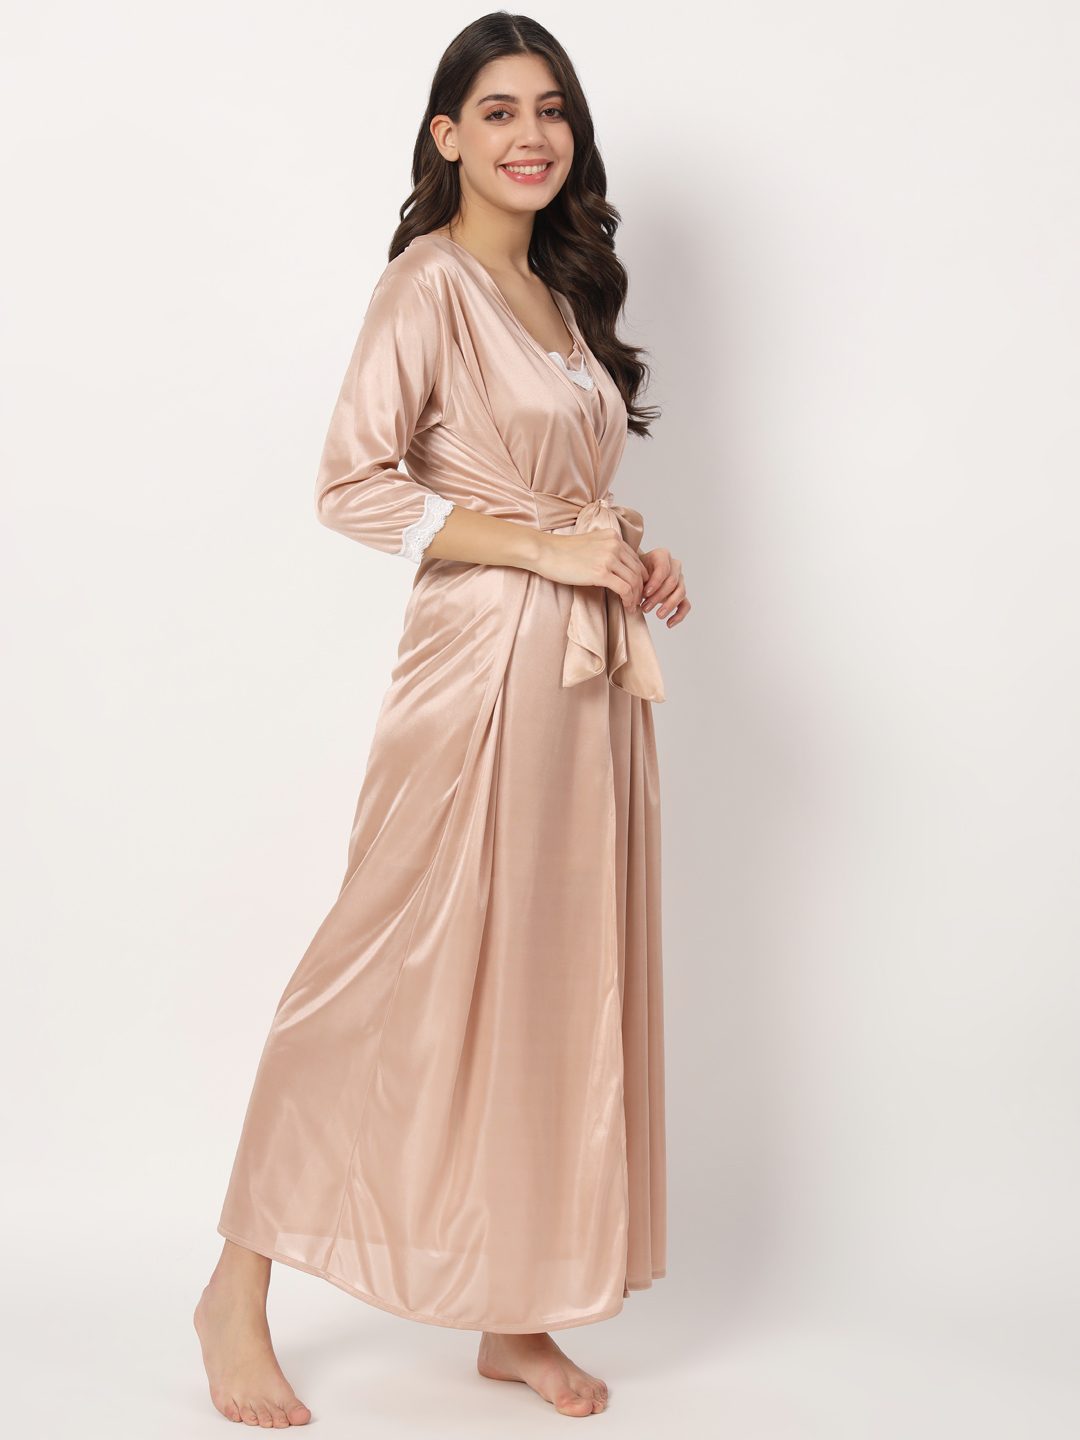 Hot Two Piece Satin Robe & Night Dress for Women X302Ag